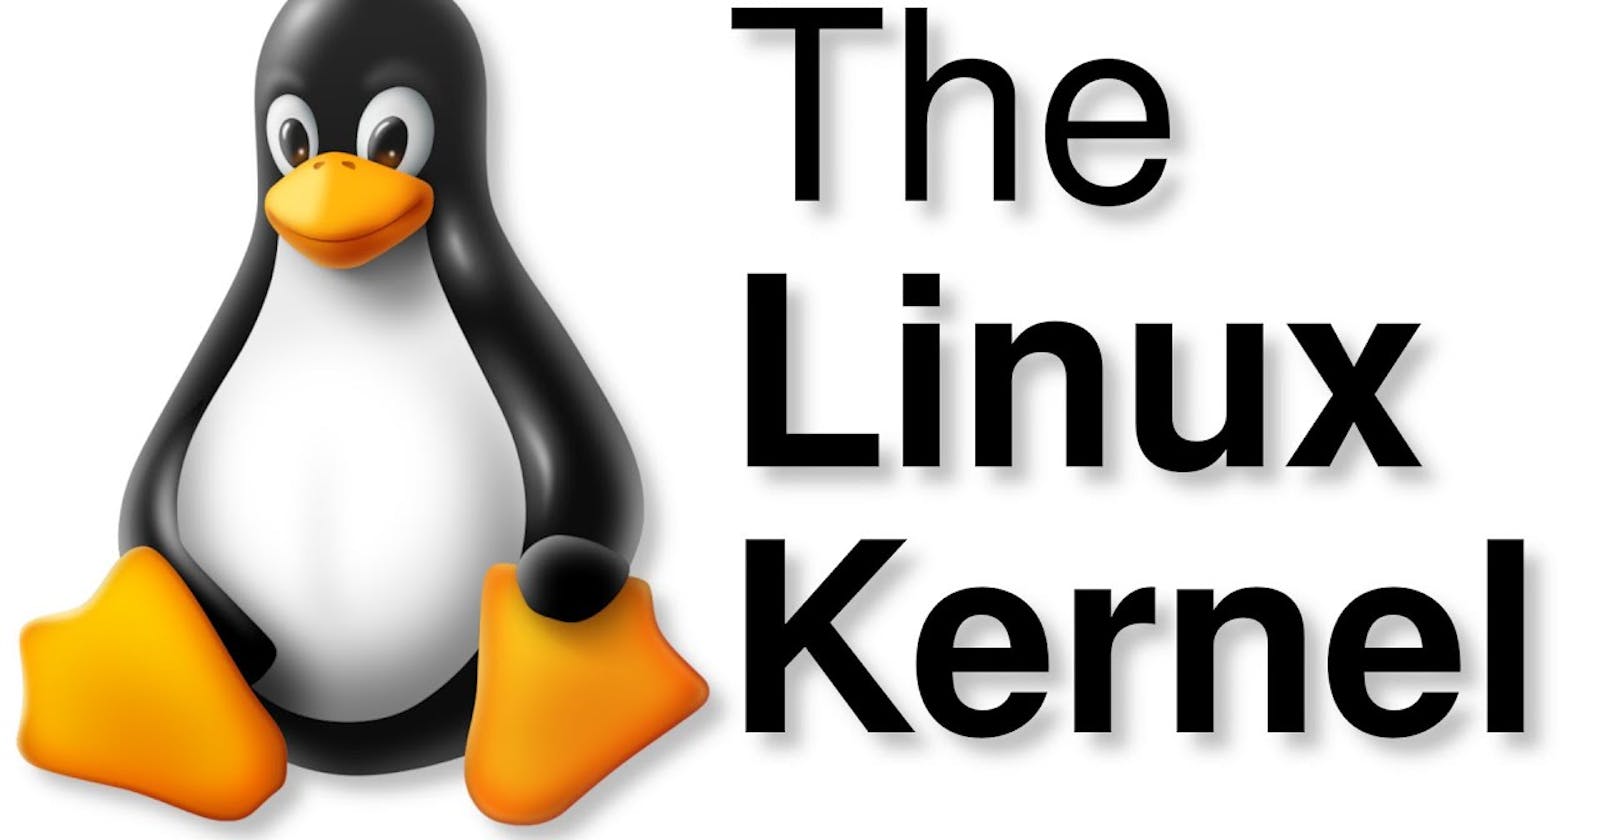 Introduction to The Linux Kernel